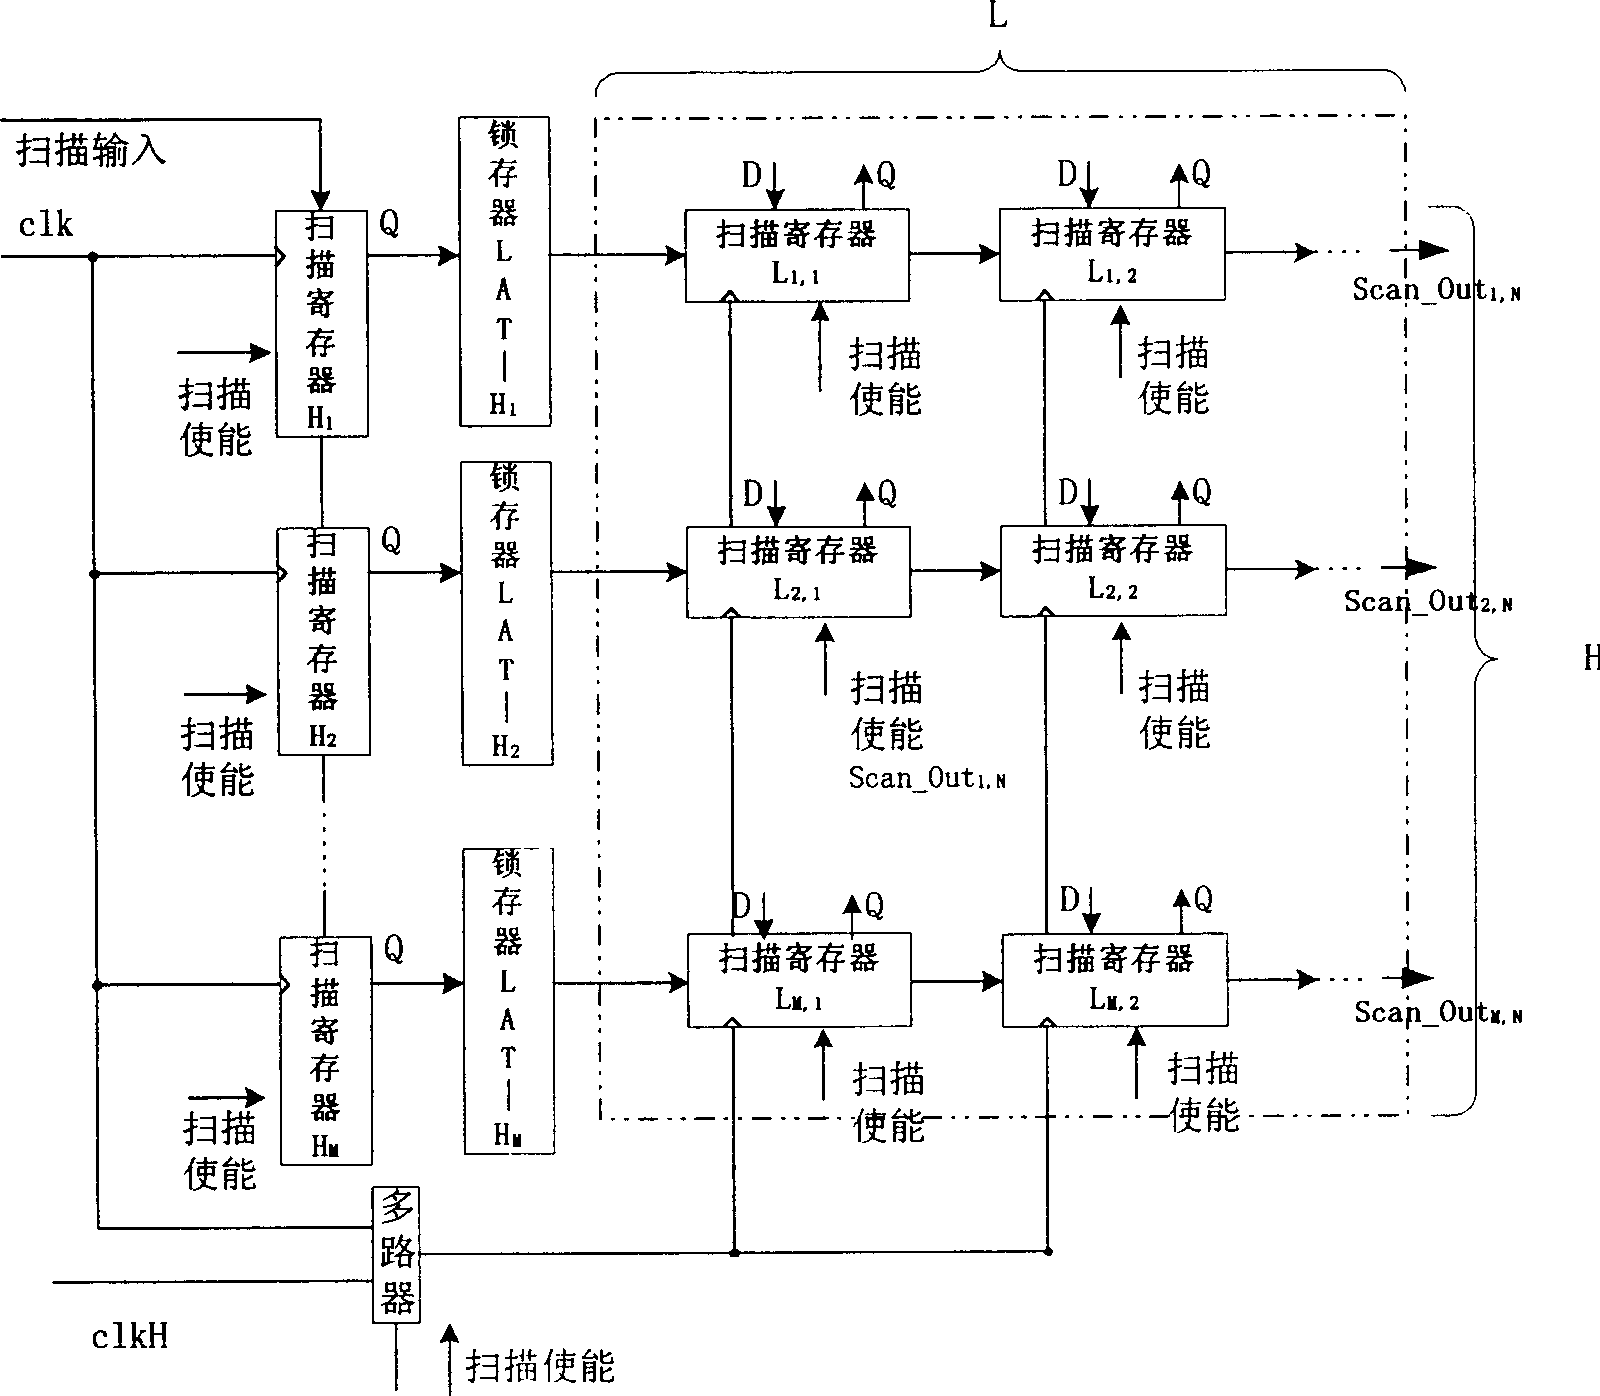 2D scan tree structure for measurable scan design of low-power integrated circuits